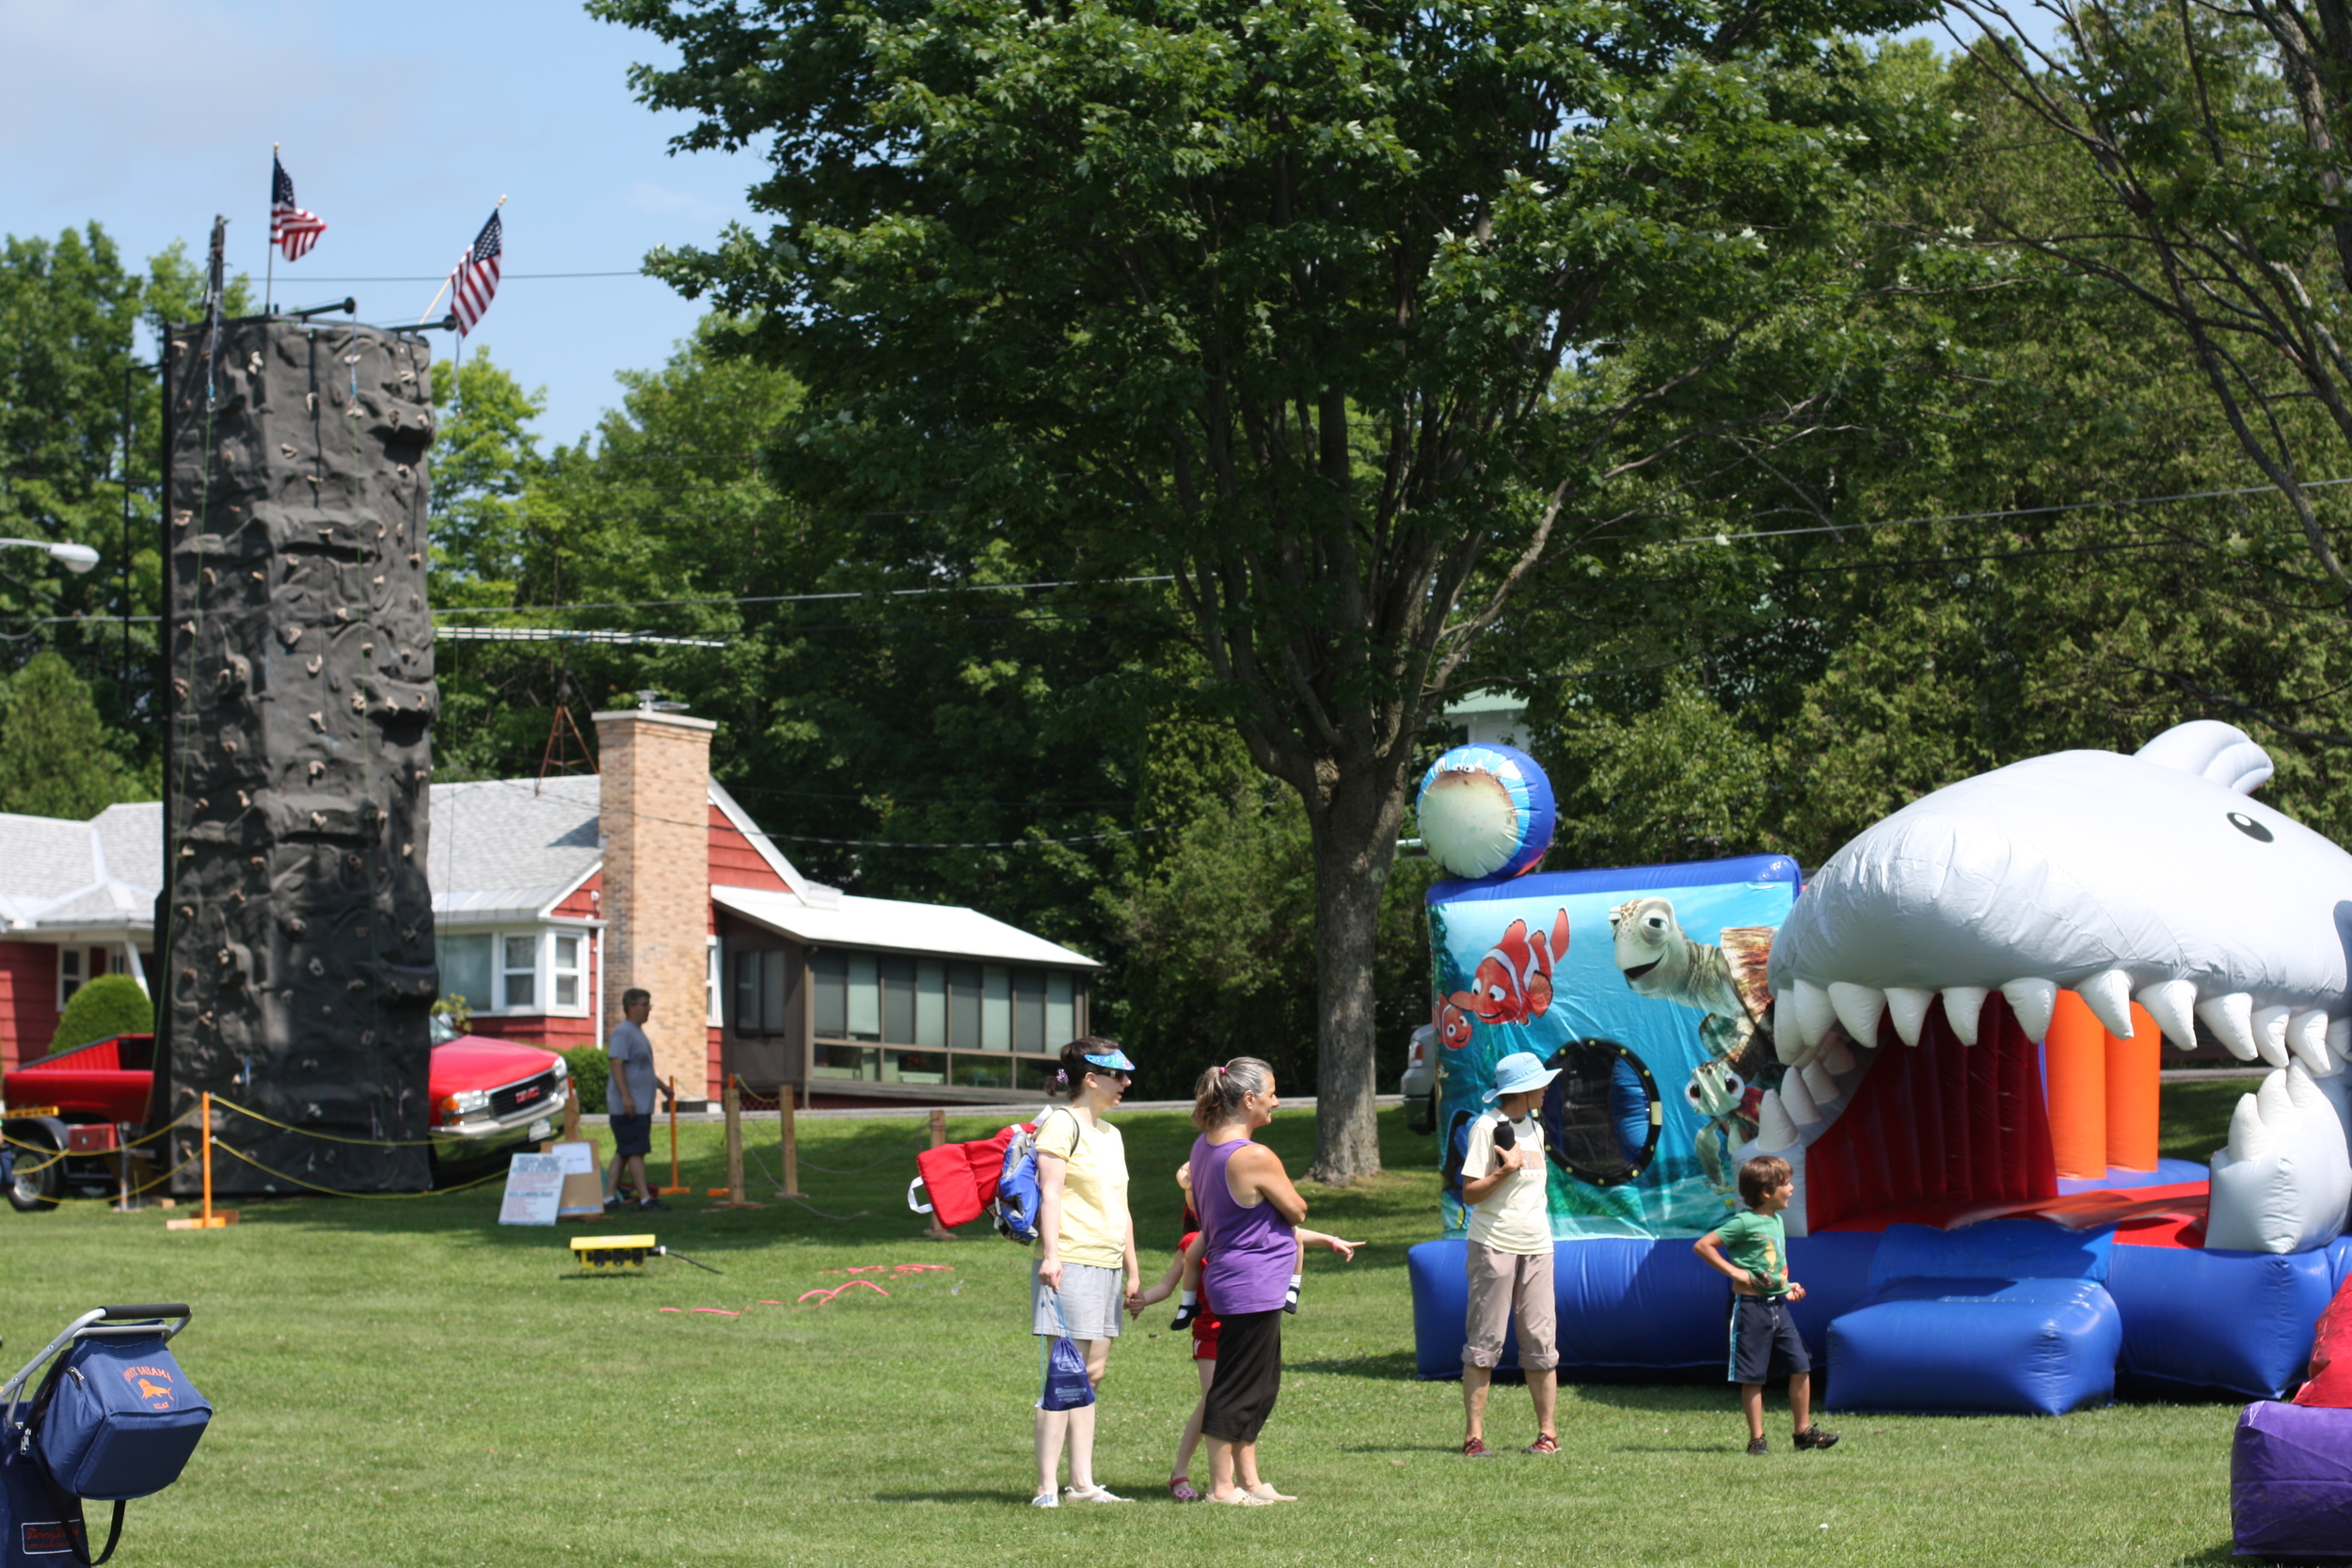 A load of fun for kids. July 4th, Town Park. Schroon Lake.